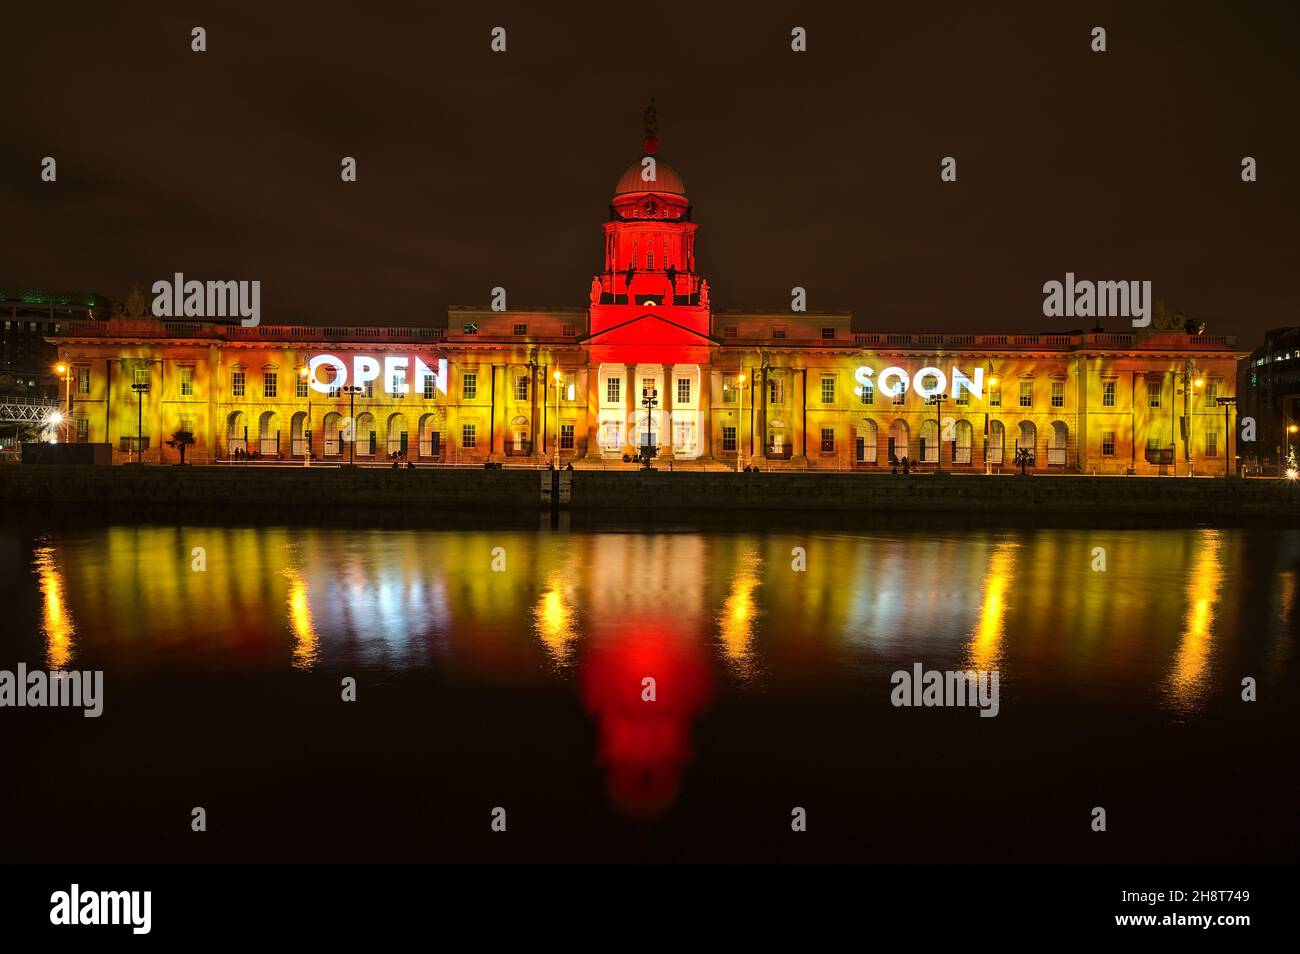 Dublin, Ireland - November 13. 2021: Beautiful wide angle view of The Custom House decorated for Christmas in yellow and red colors with 'open soon' Stock Photo